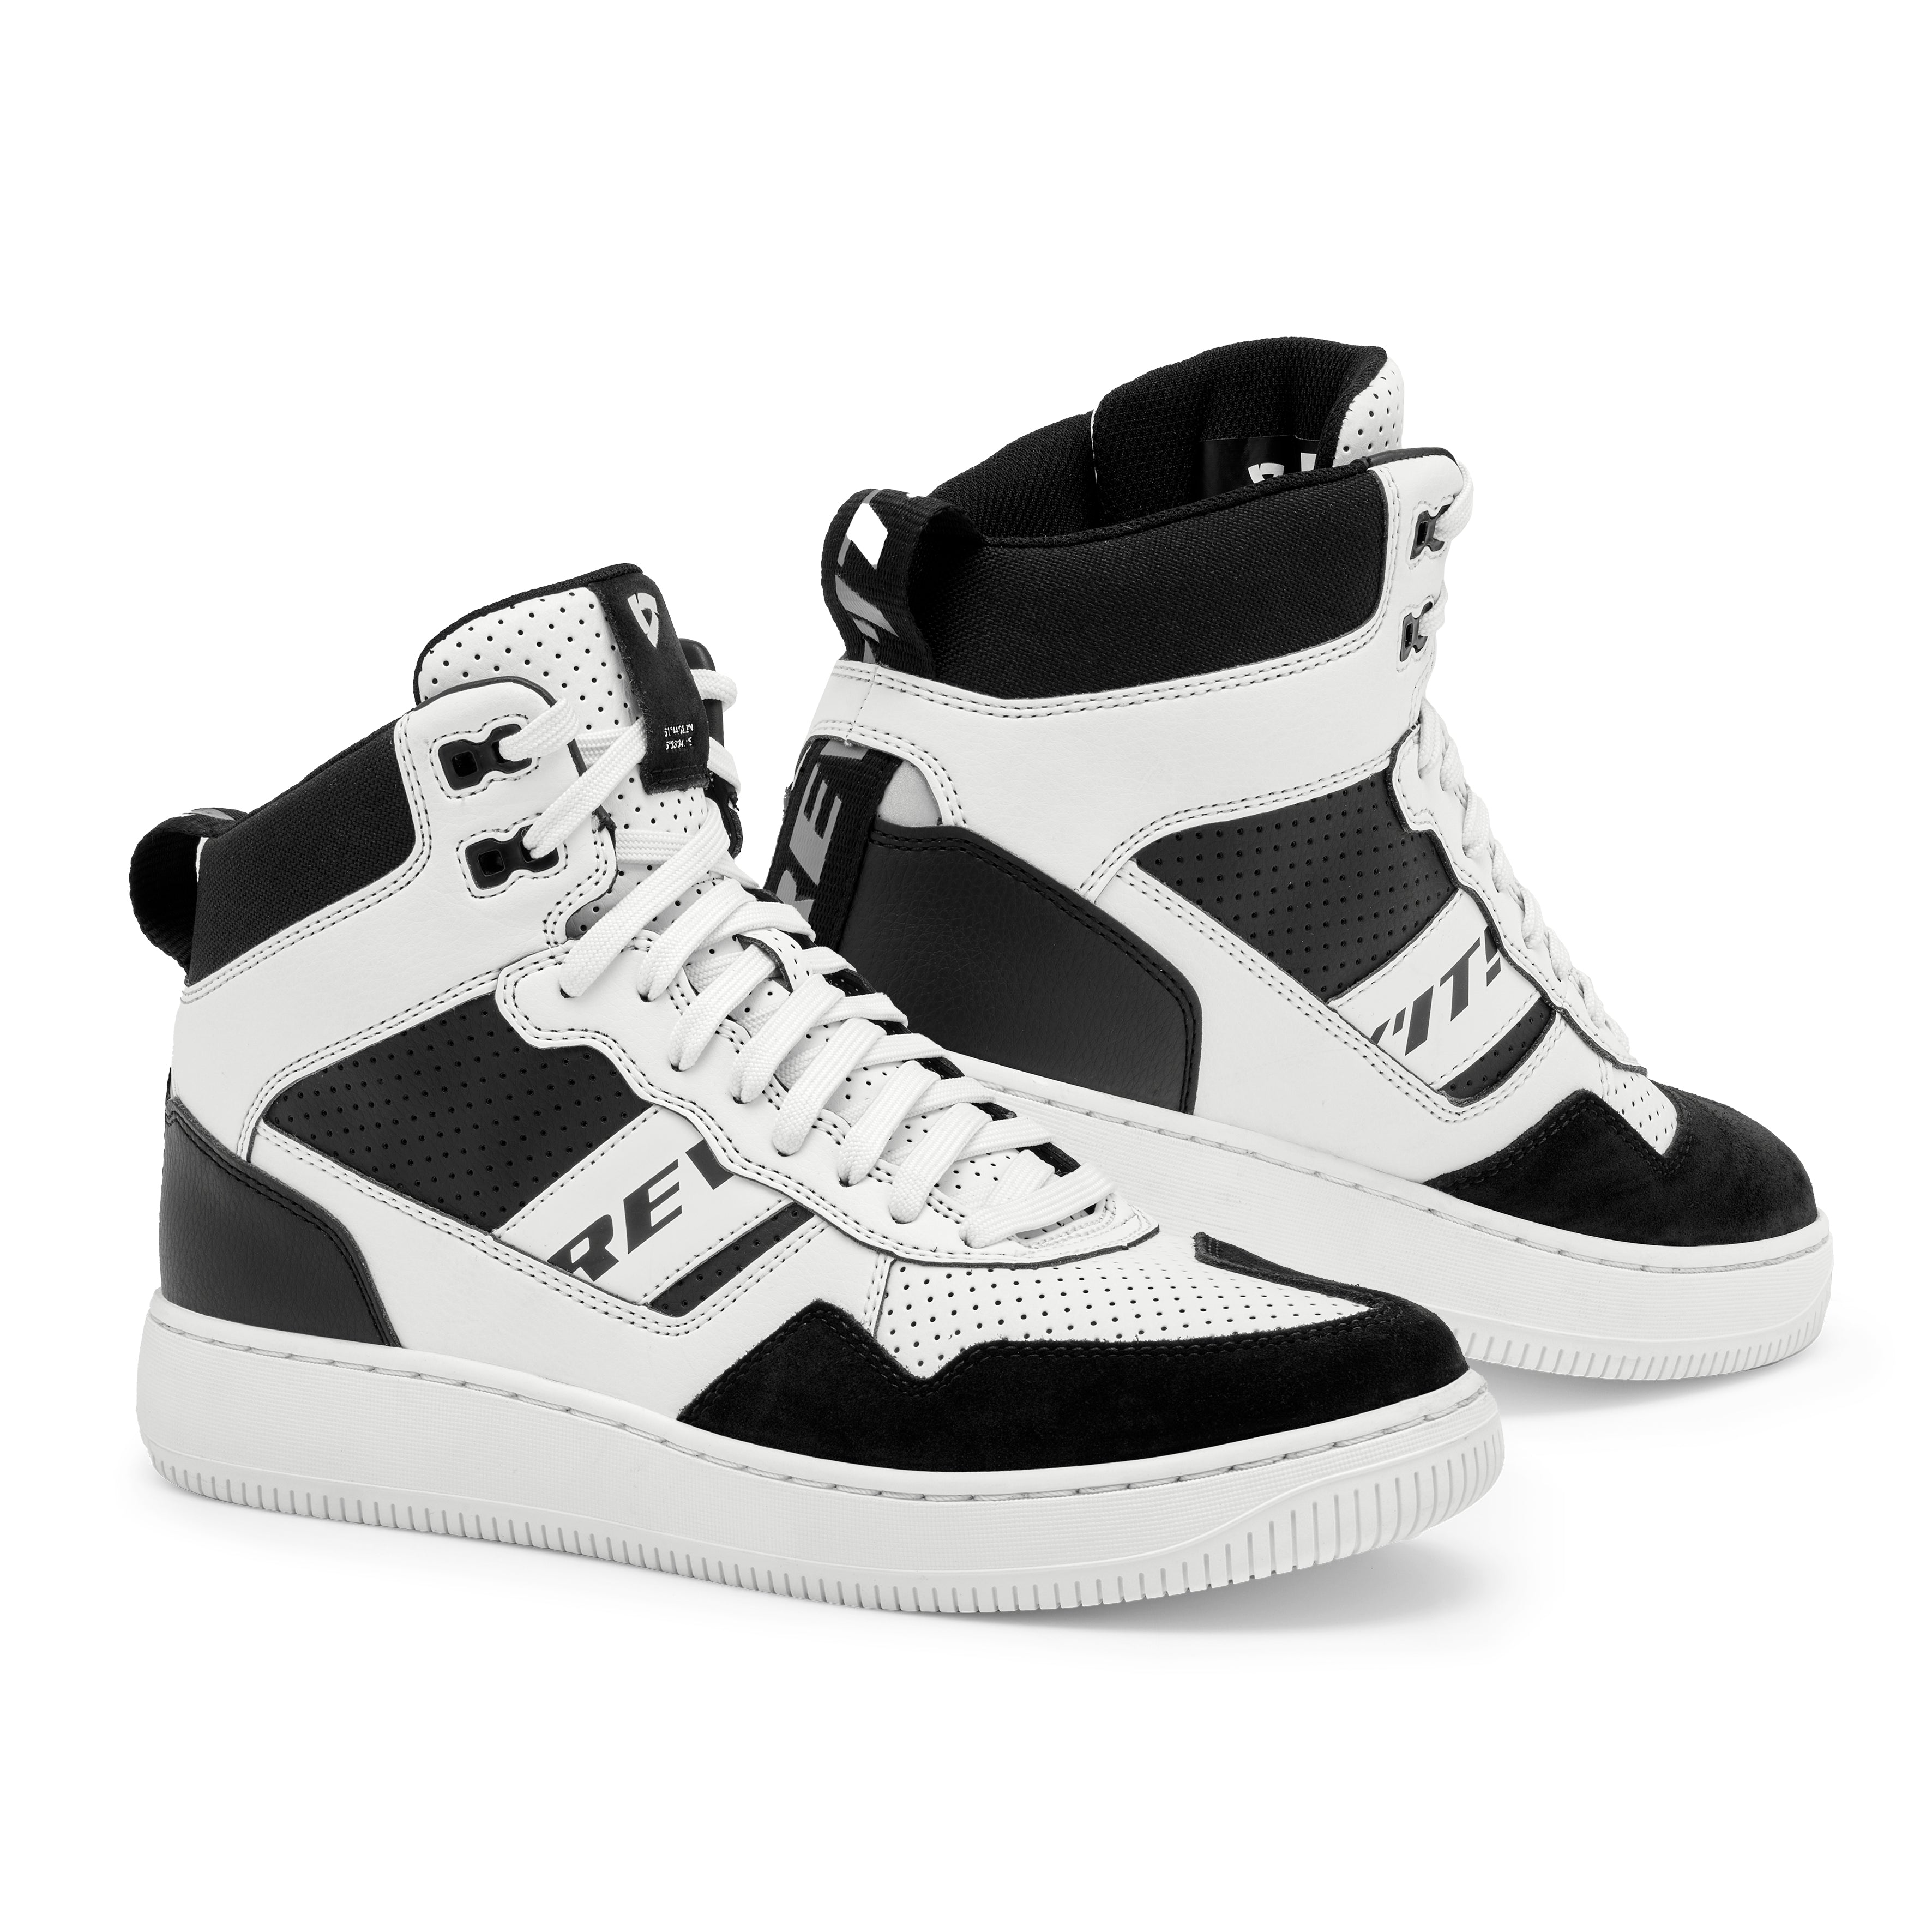 Rev'it! Pacer Boots - White Black